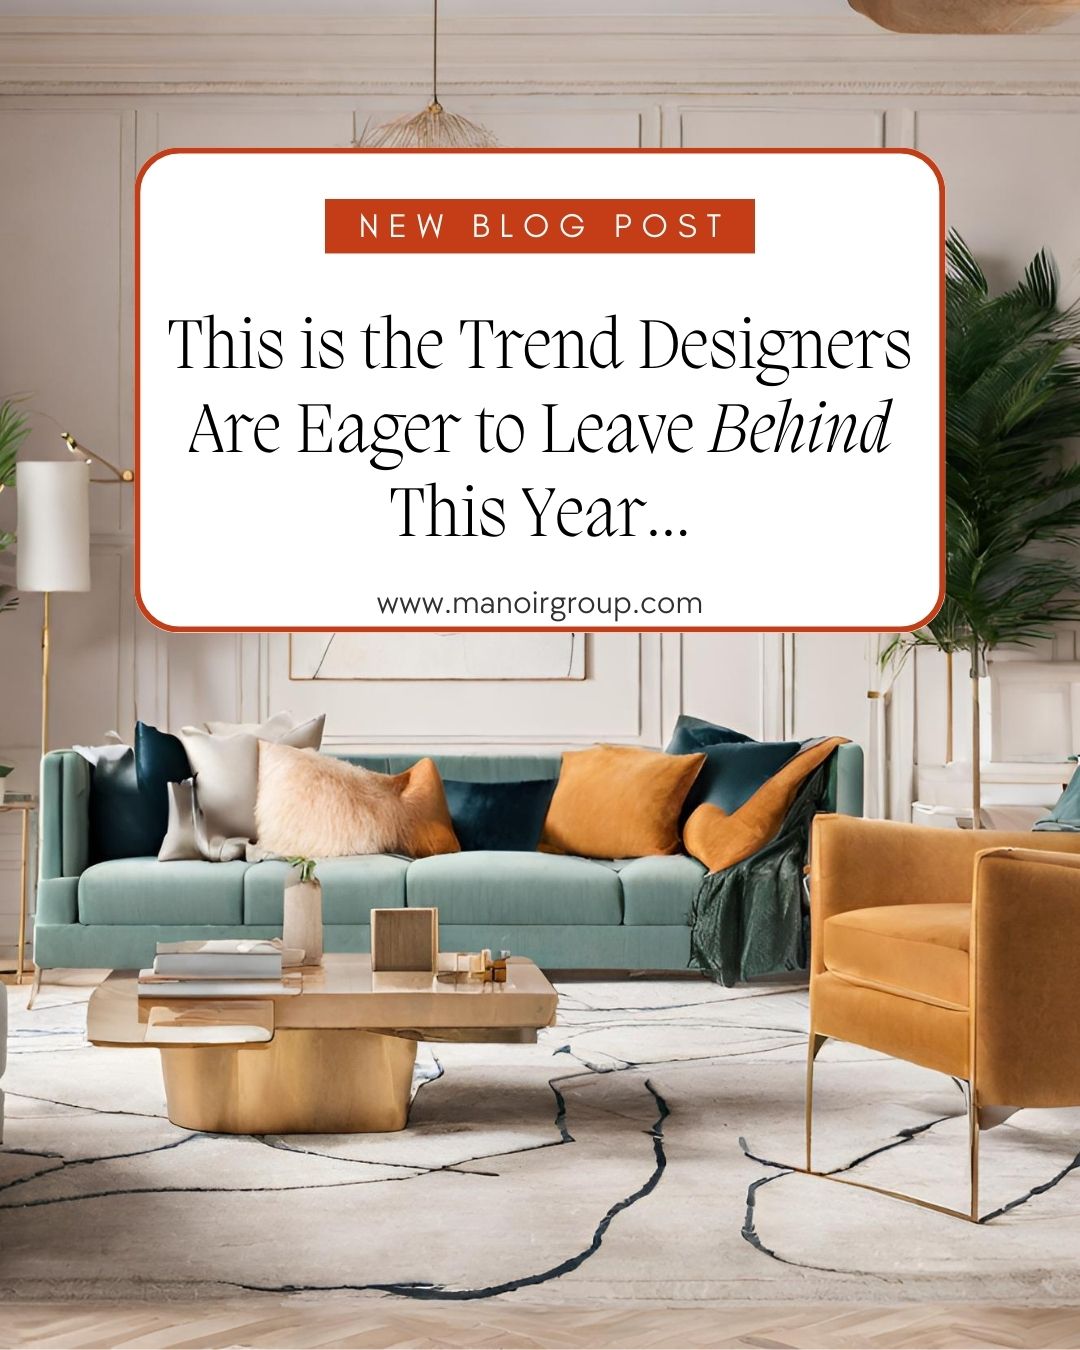 This is the Trend Interior Designers Are Eager to Leave Behind This Year